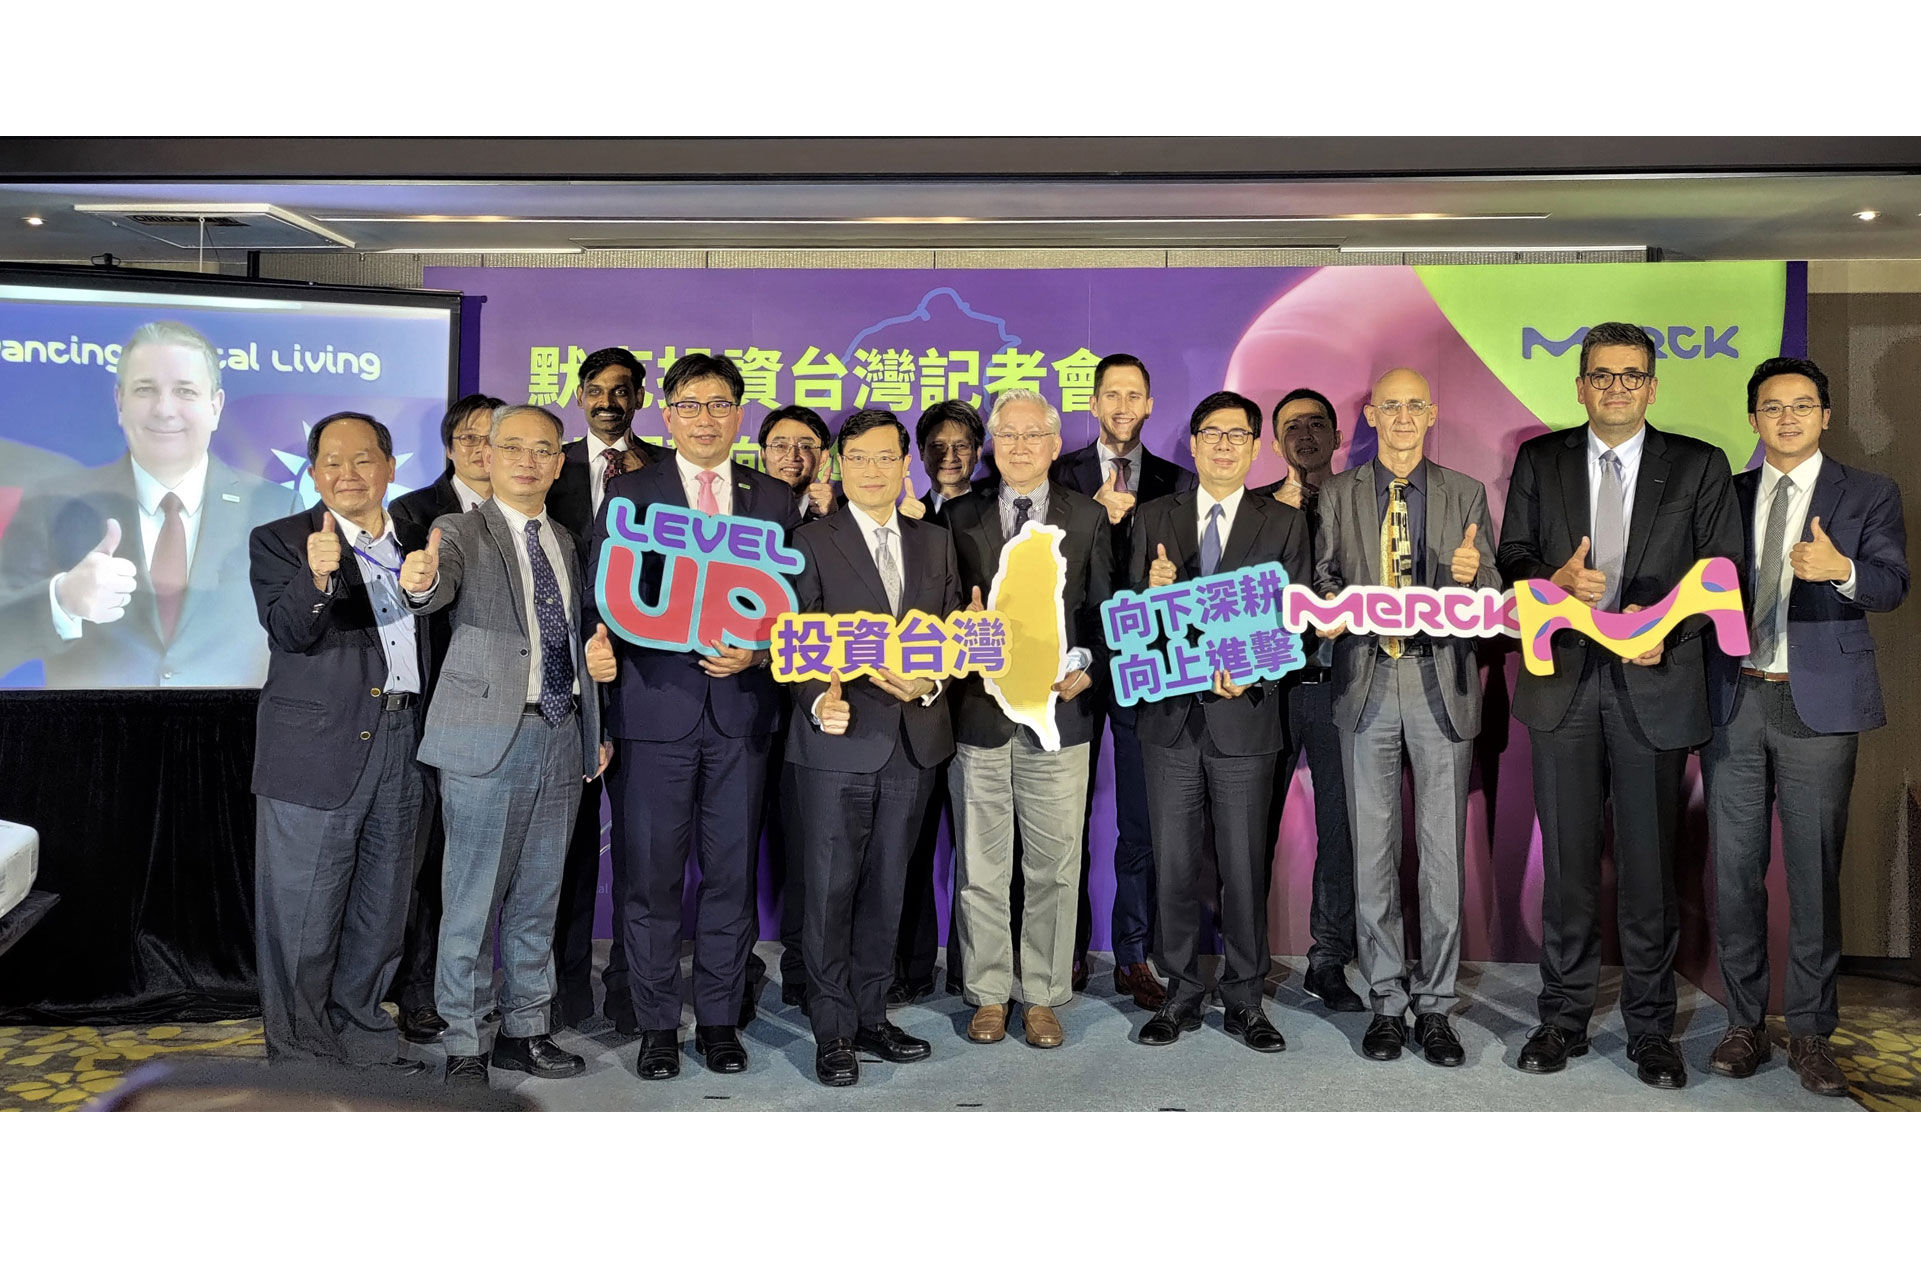 Merck announced to invest NTD 17 billion in Taiwan (The largest-ever investment since 1989) Photo-3